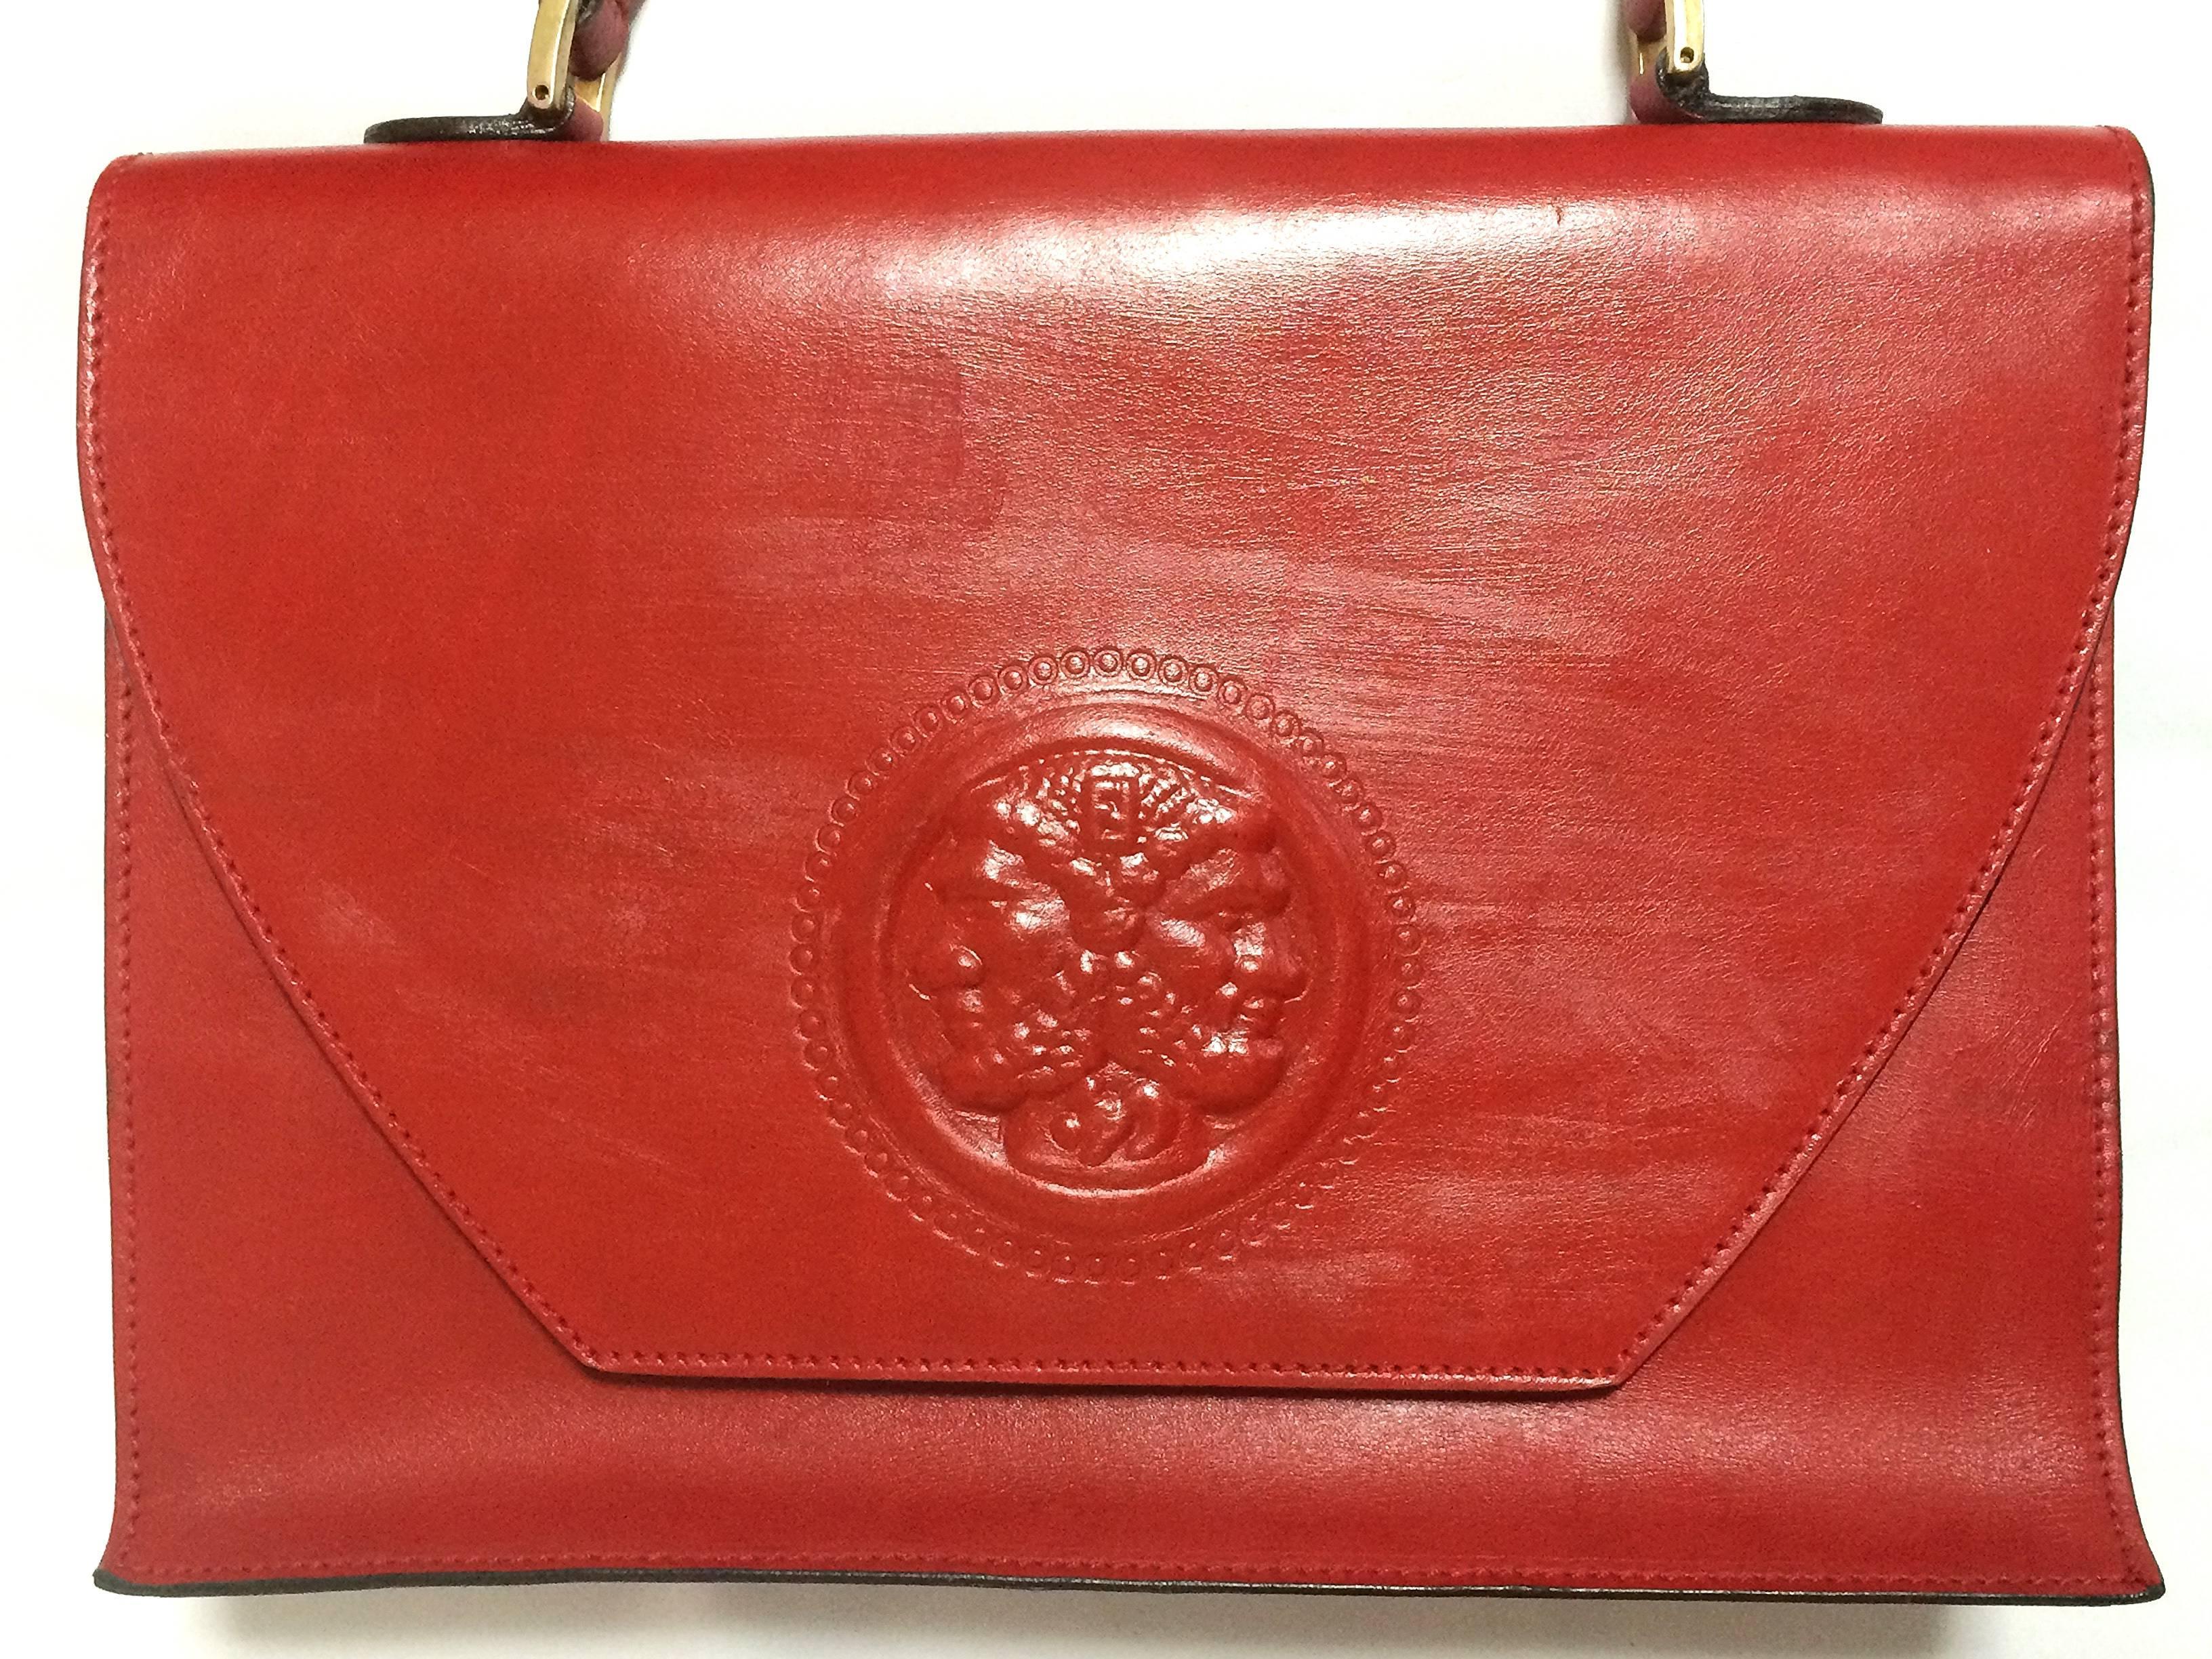 1990s. Vintage FENDI genuine red leather classic handbag with iconic Janus medallion embossed motif at front.

For all FENDI vintage lovers, this unique and rare vintage masterpiece is right for you!
Classic handbag in genuine red